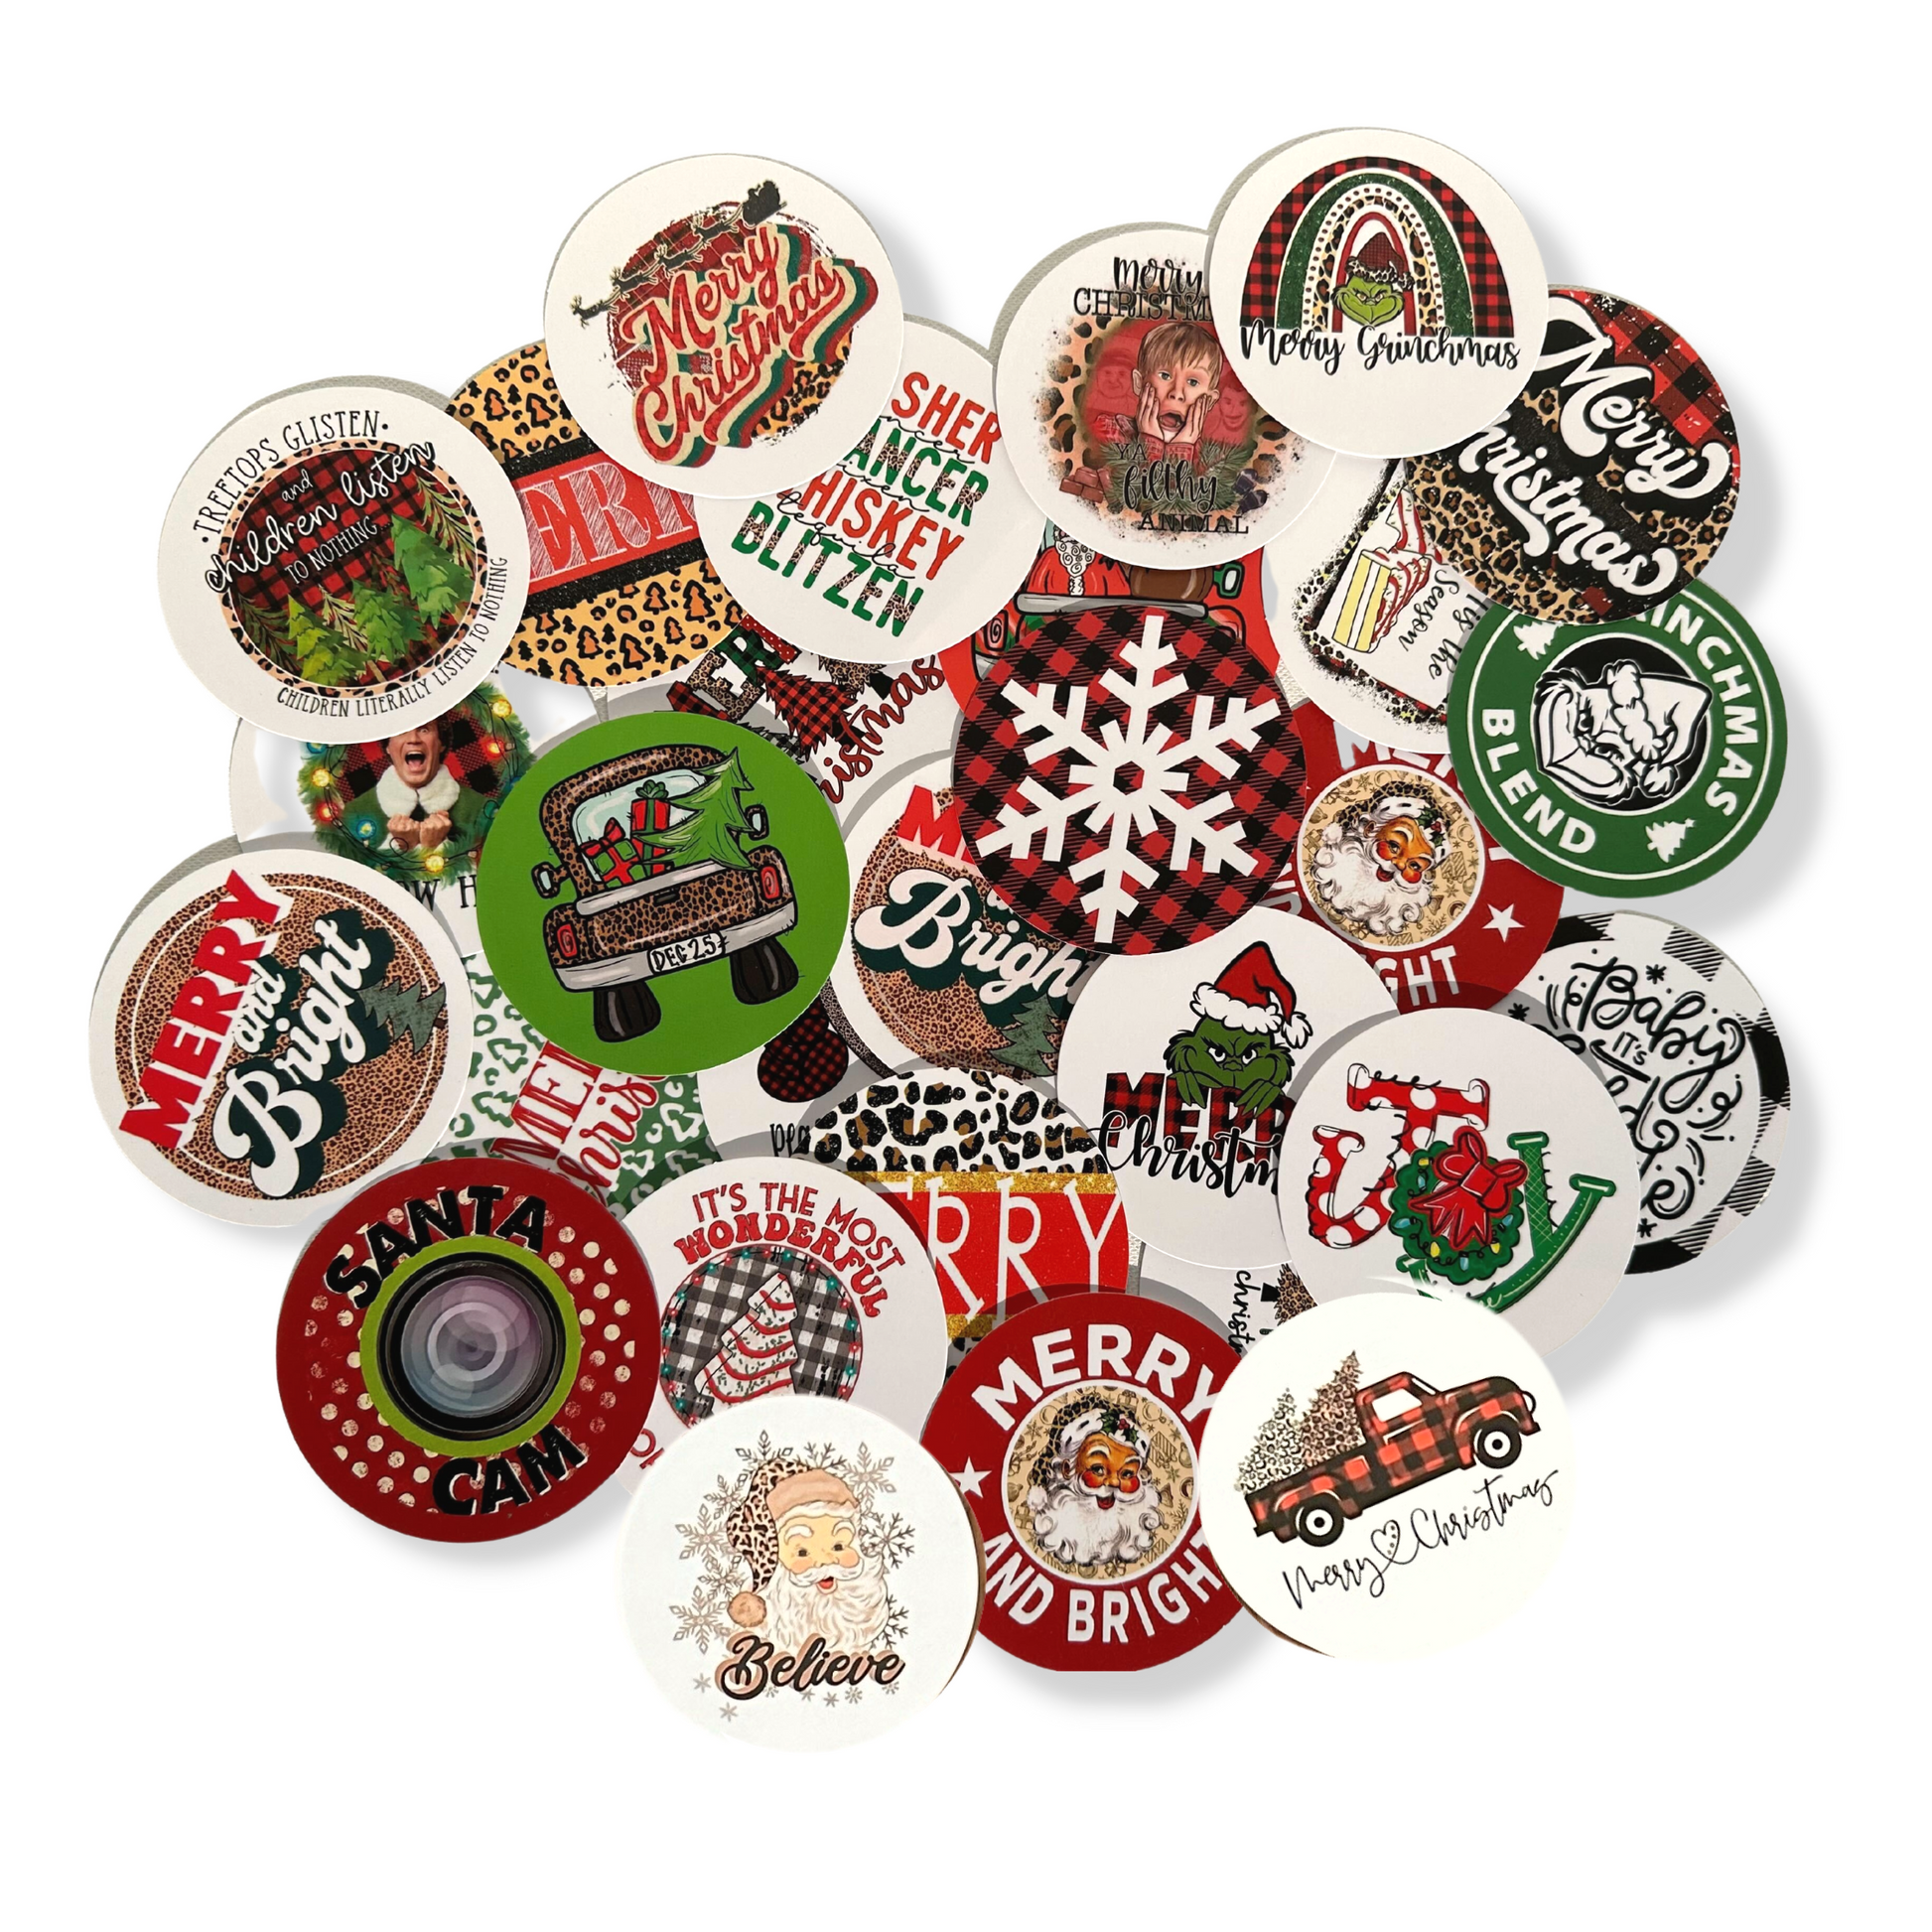 Freshie Cardstock Cutouts Rounds 2.5 inch for Freshies Random Mix